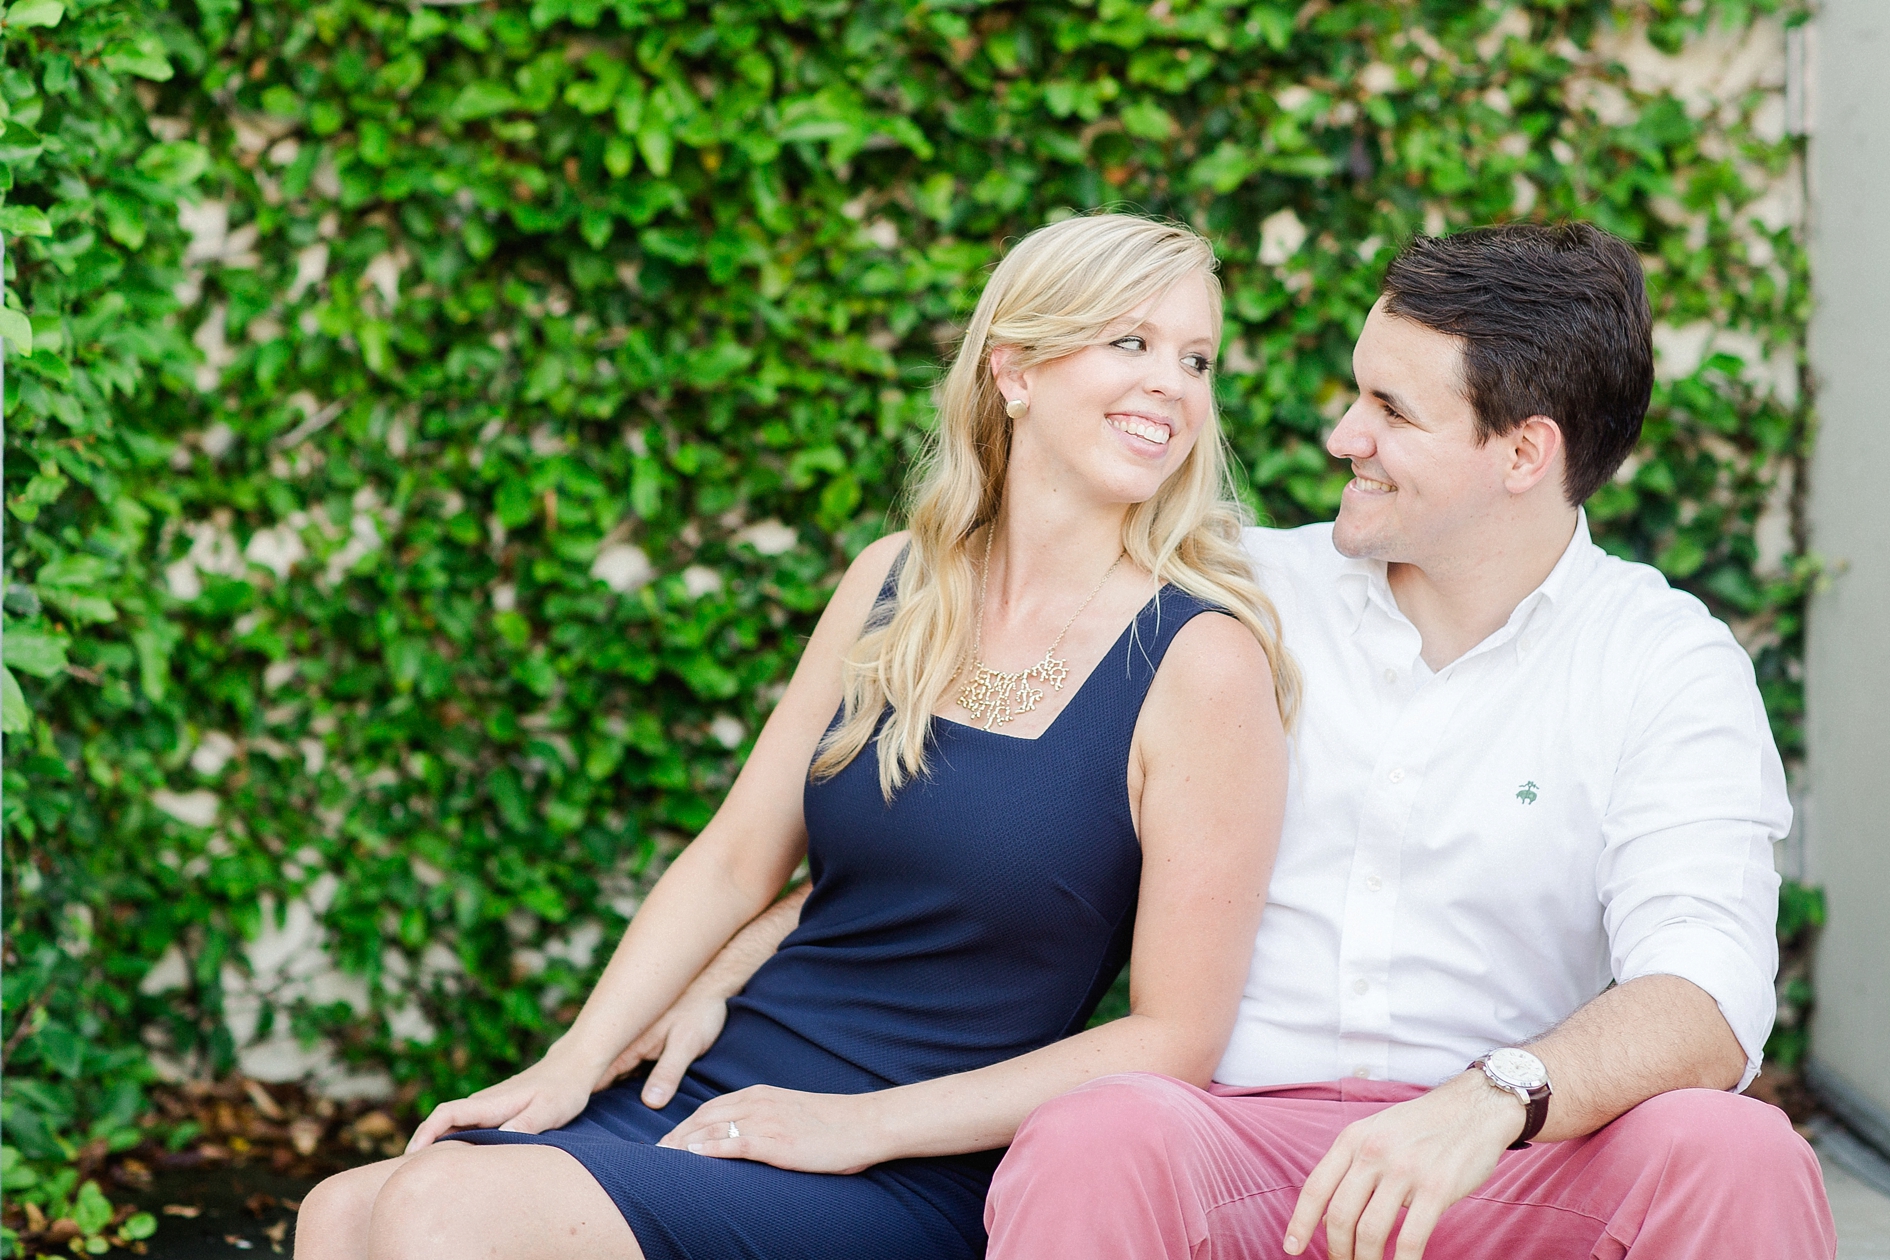 Downtown St. Petersburg Engagement | © Ailyn La Torre Photography 2015